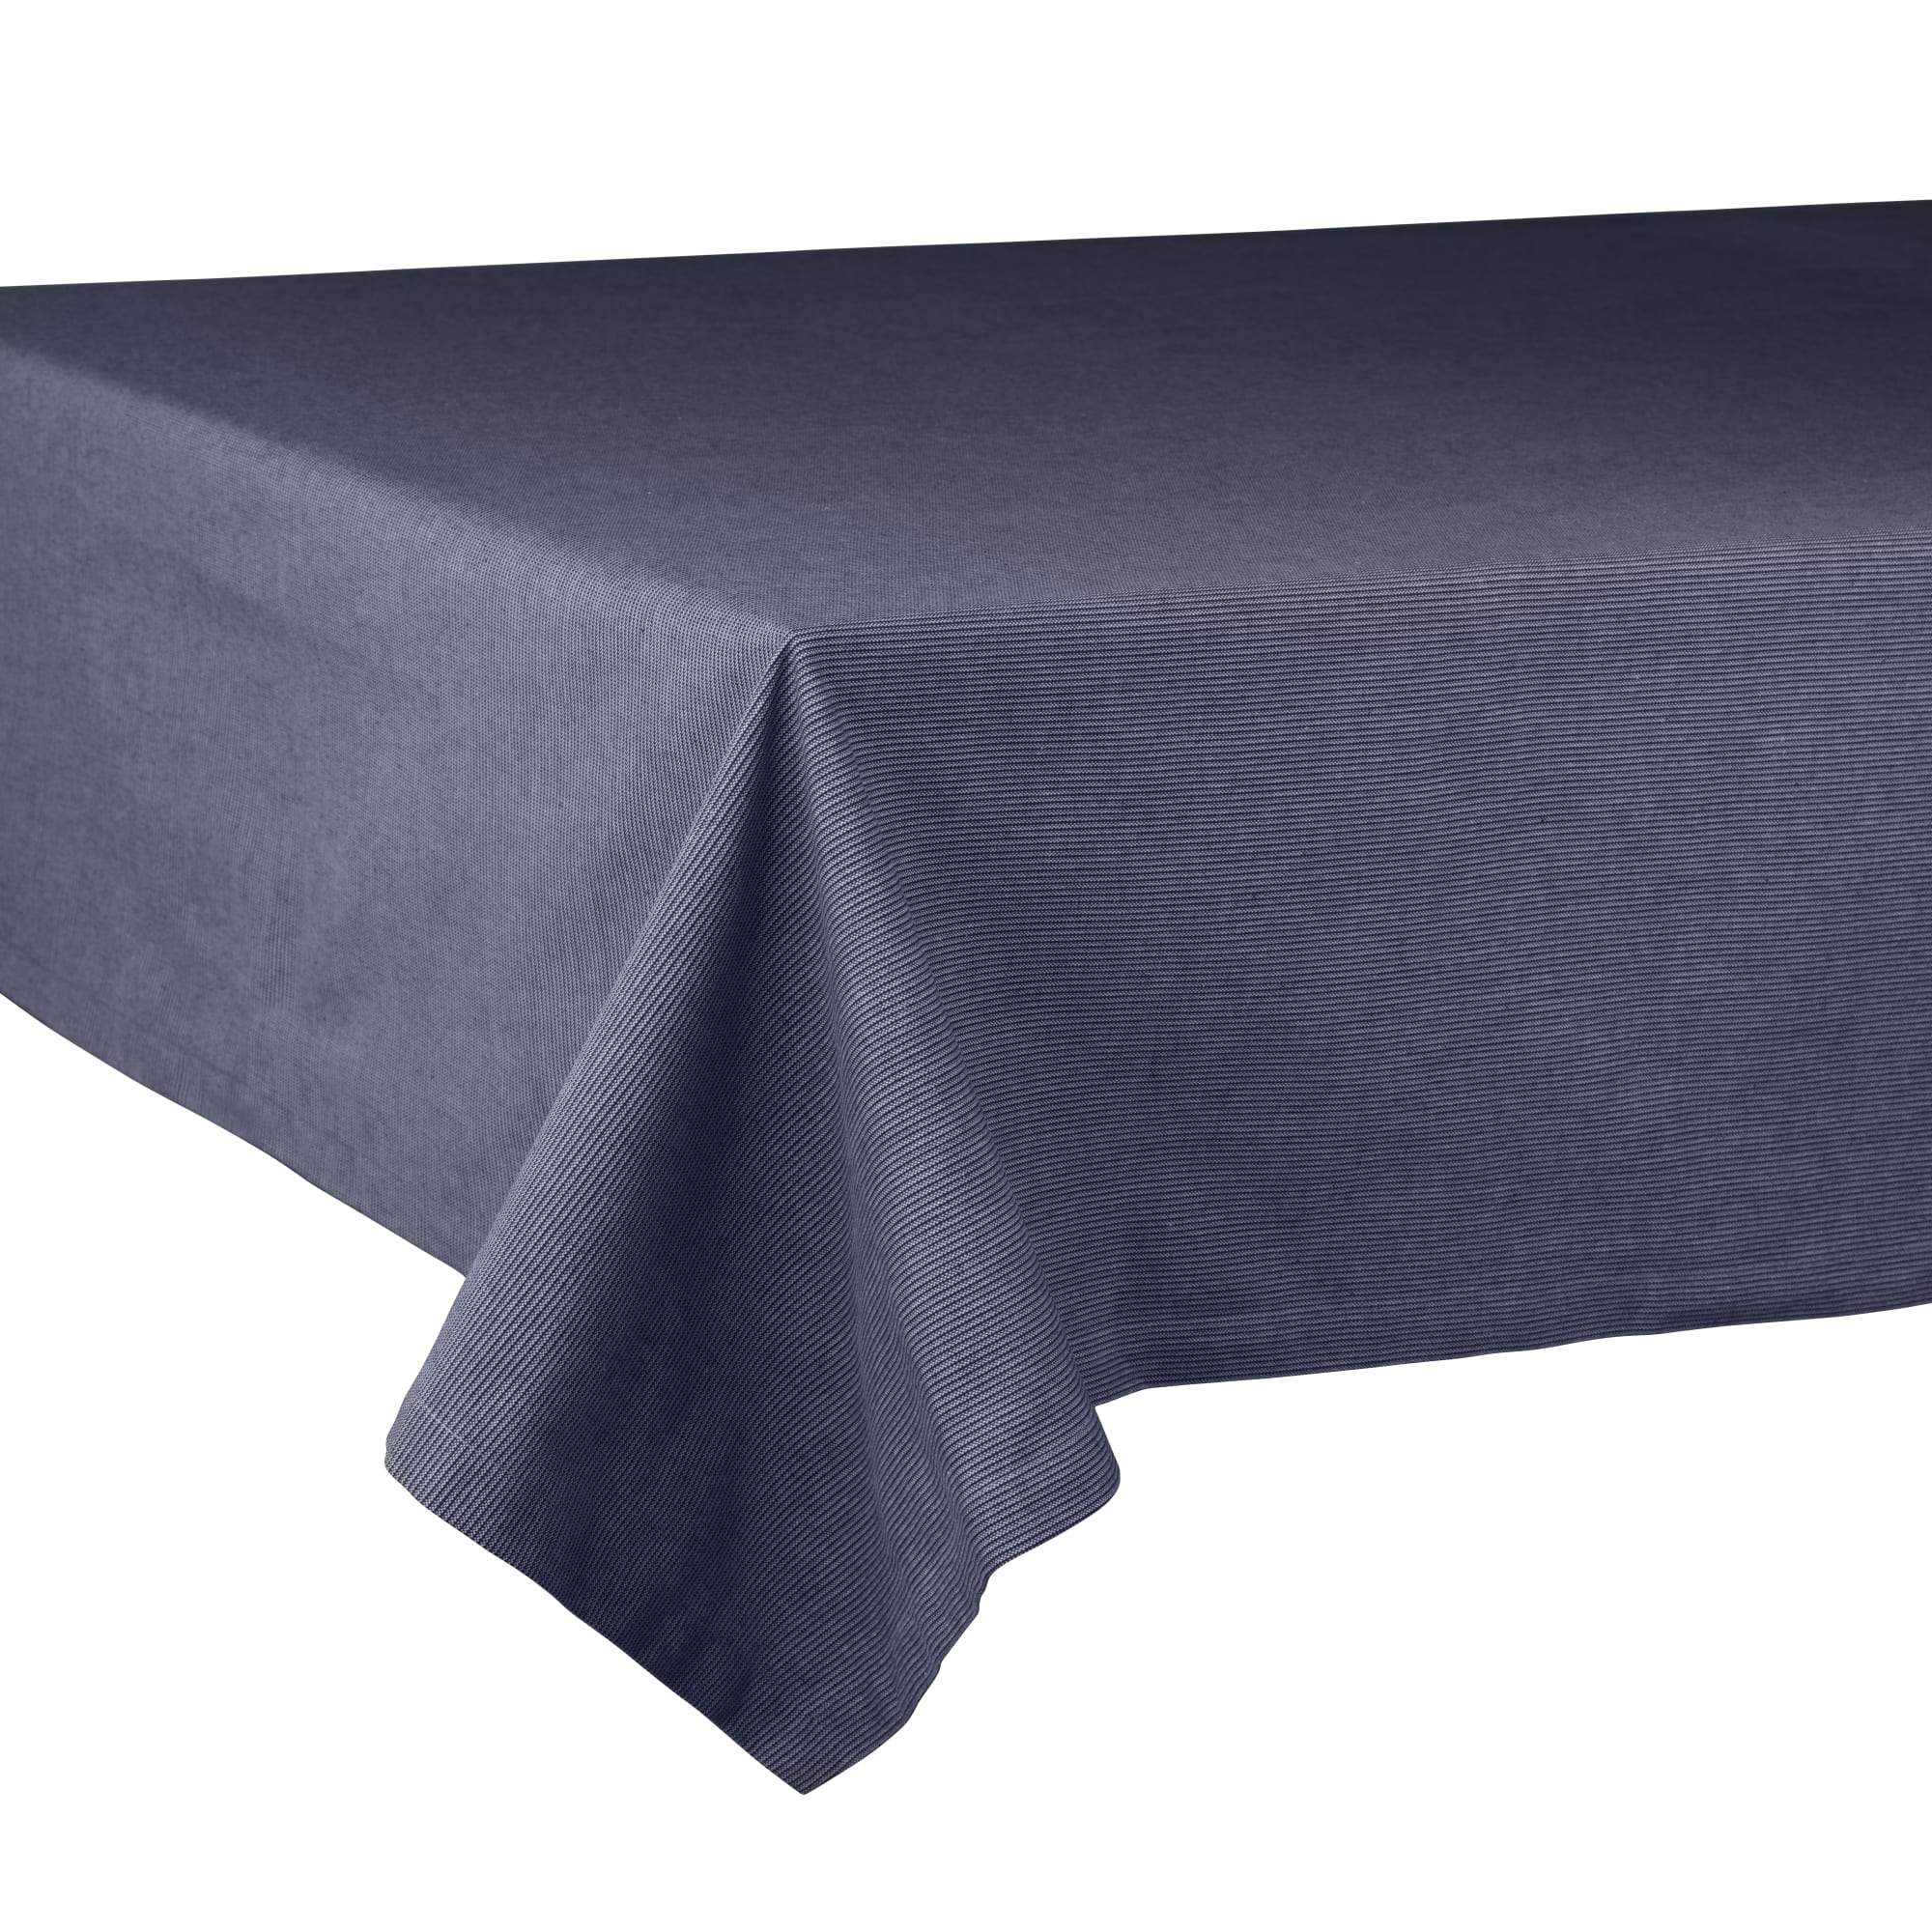 FDB Møbler R21 Colorline TableCleoth donkerblauw, 150x150cm